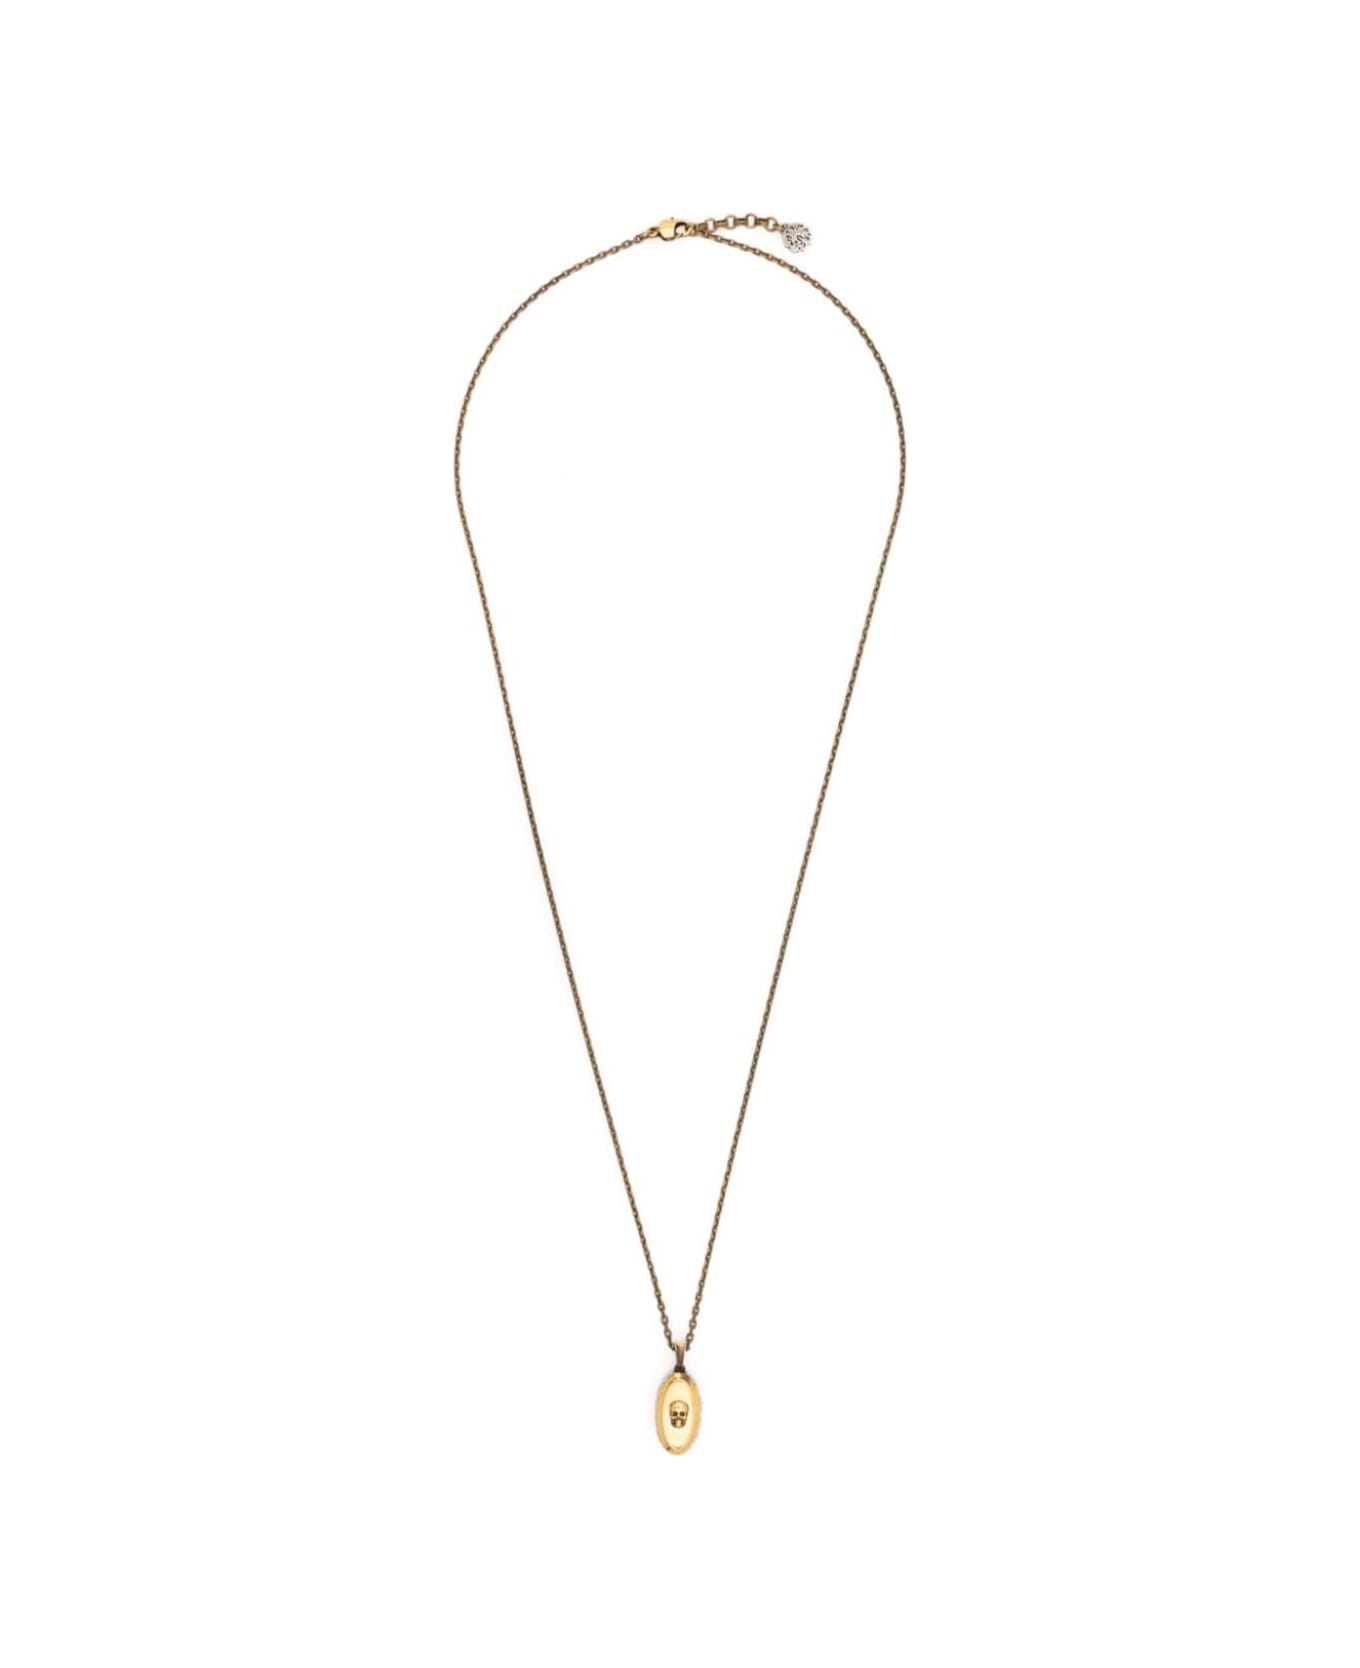 Alexander McQueen Gold-colored Chain Necklace With Skull Charm In Brass Woman - Metallic ネックレス